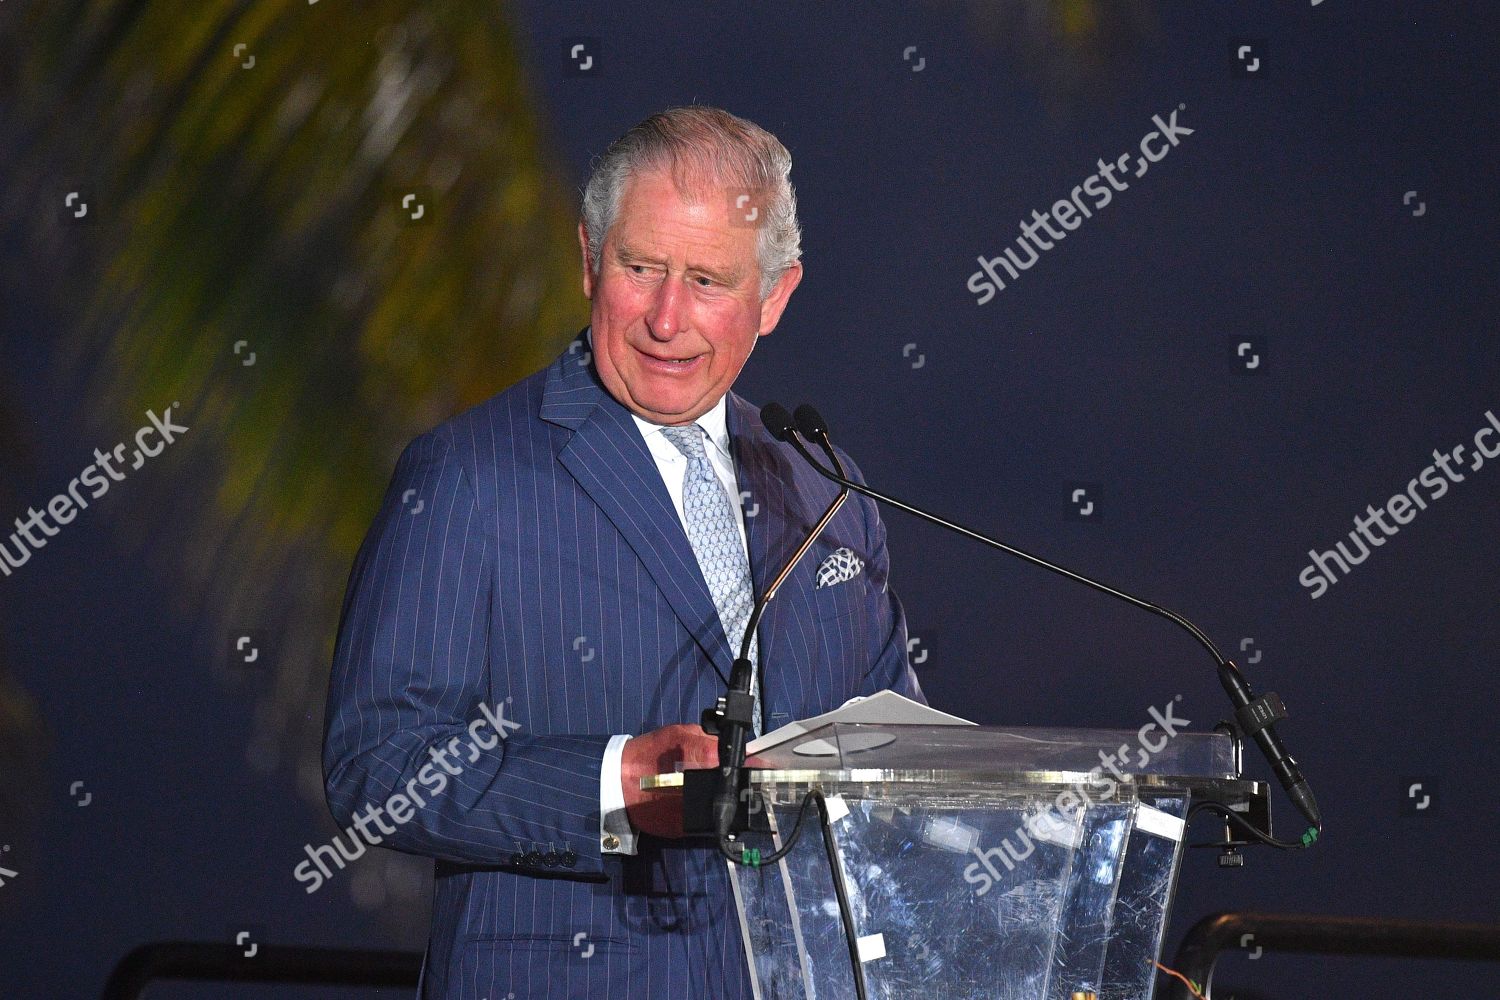 prince-charles-and-camilla-duchess-of-cornwall-caribbean-tour-cayman-islands-shutterstock-editorial-10180820di.jpg